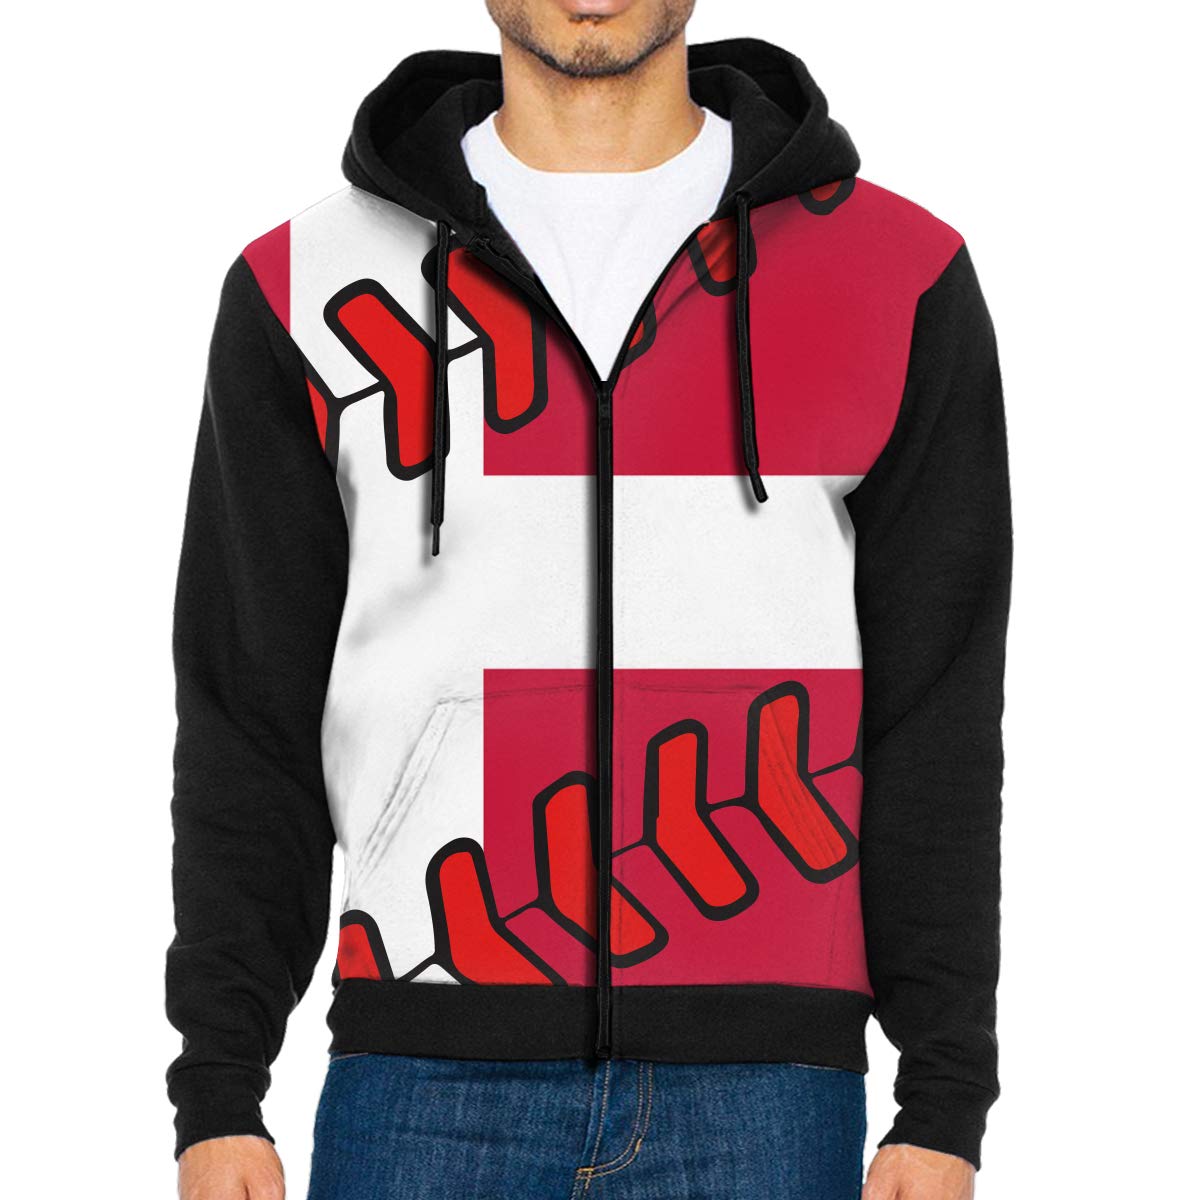 hoodie clipart drawing front